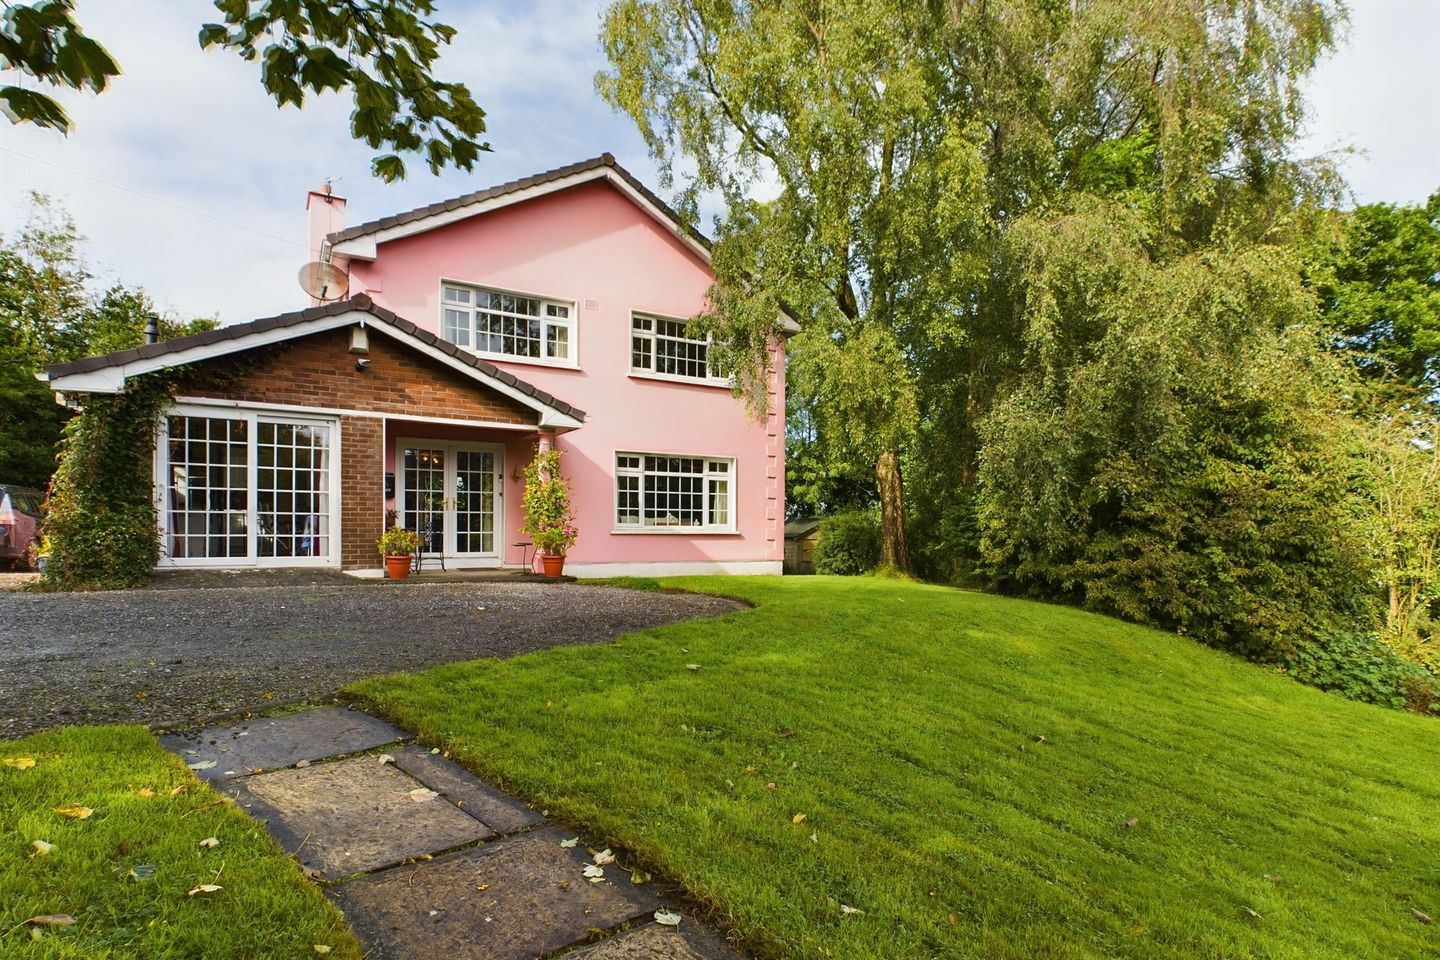 The Pink House, Keelogue, Carlow Town, Co. Carlow